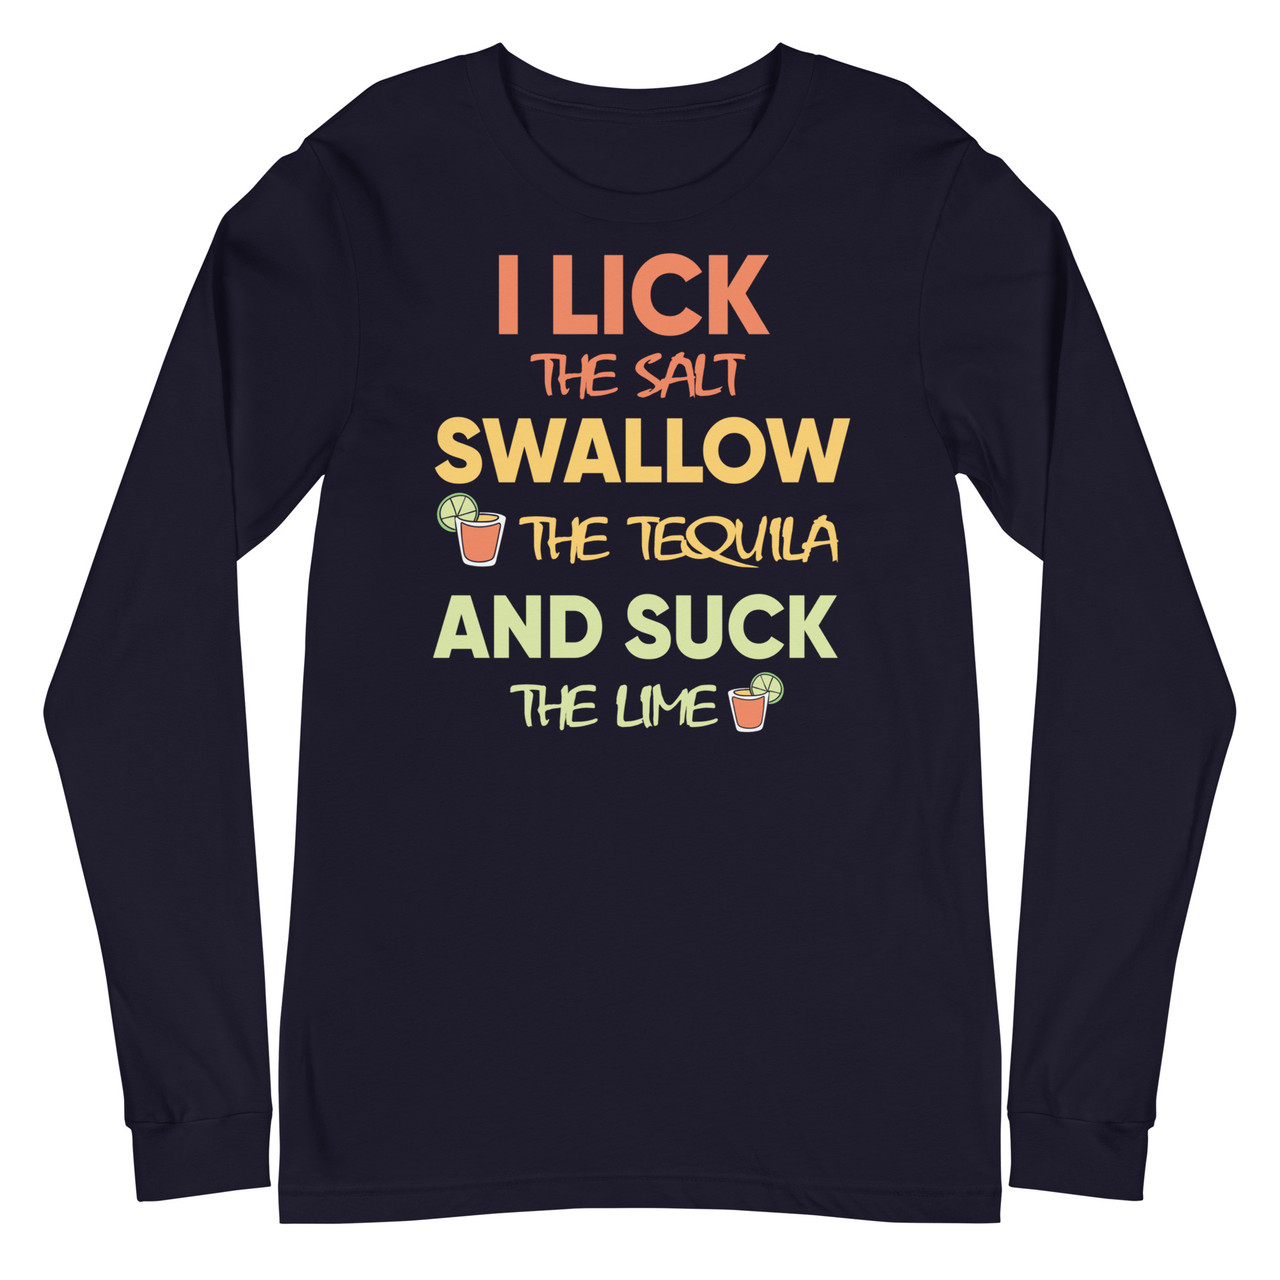 I Lick The Salt Swallow The Tequila And Suck The Lime Unisex Long Sleeve Tee - Bella + Canvas 3501 